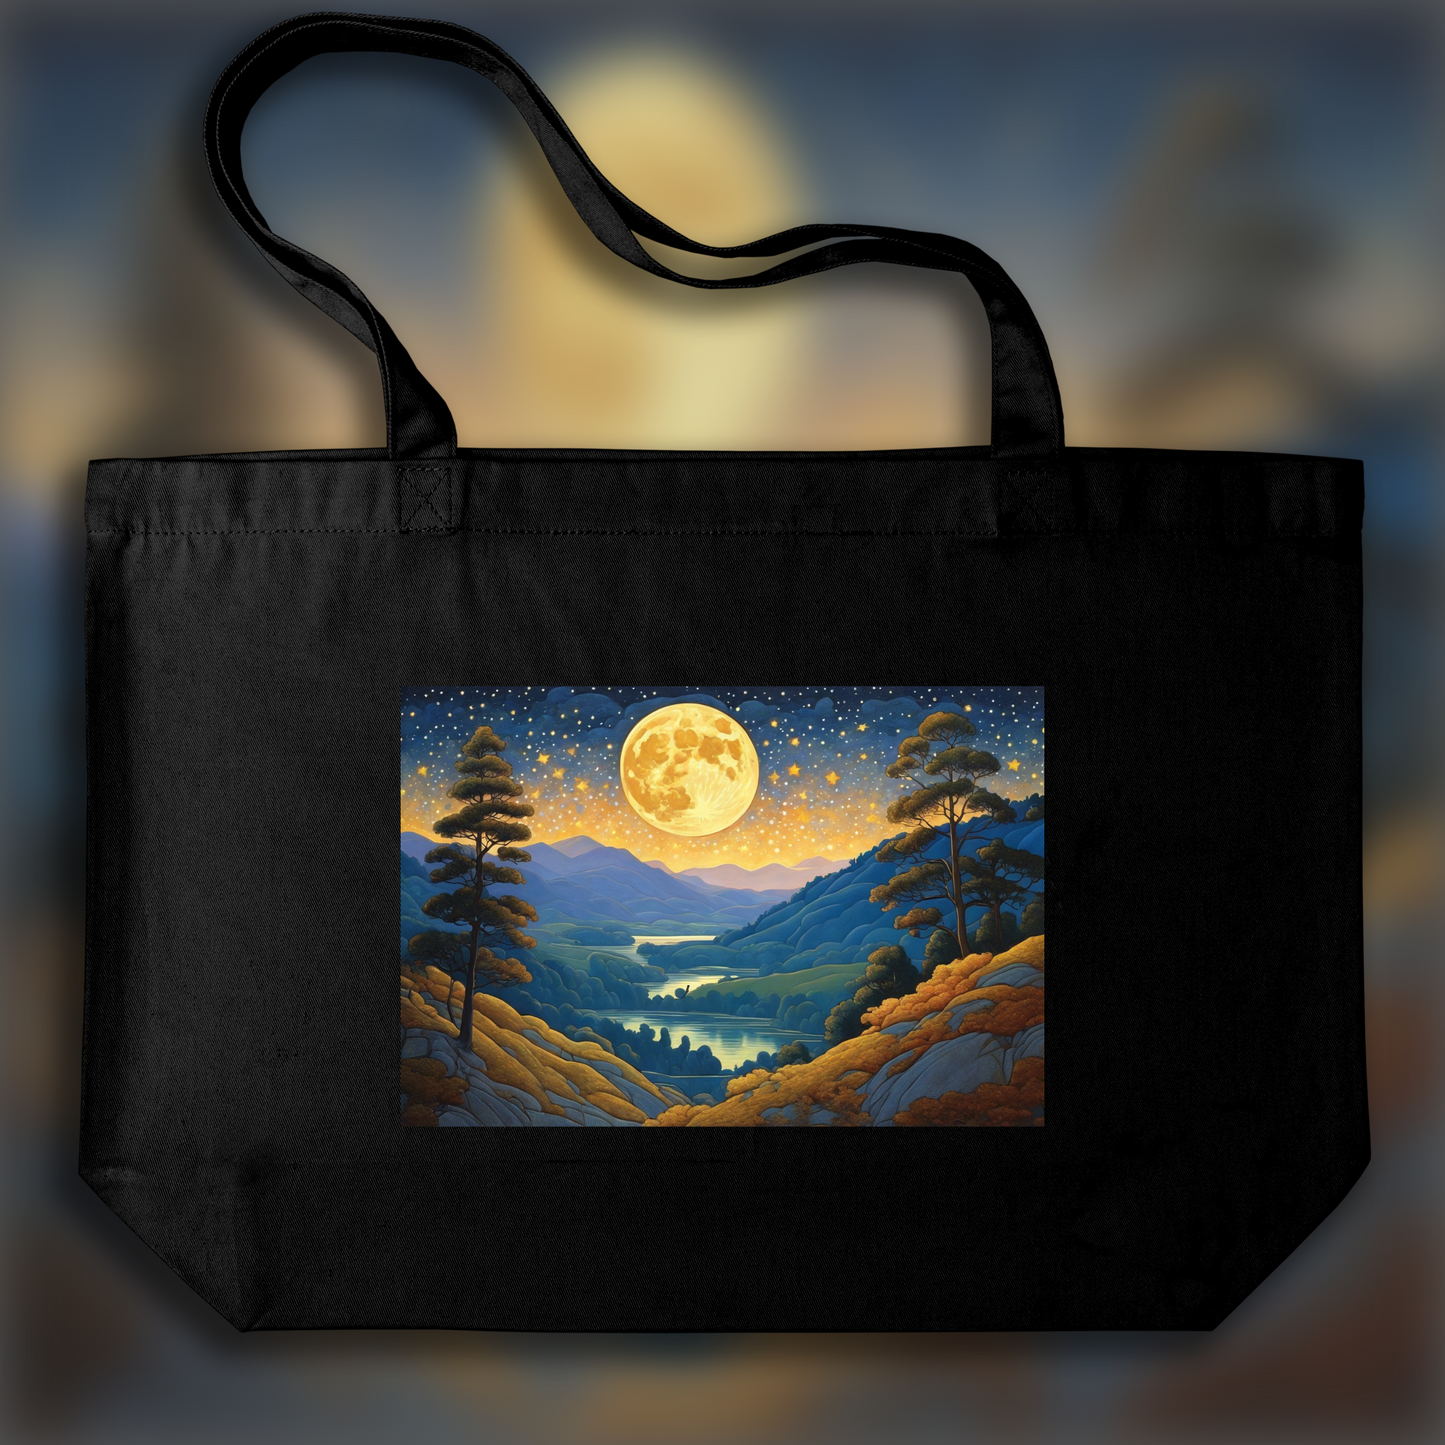 Tote bag - Paul Ranson, Moon and starry sky - 51060819